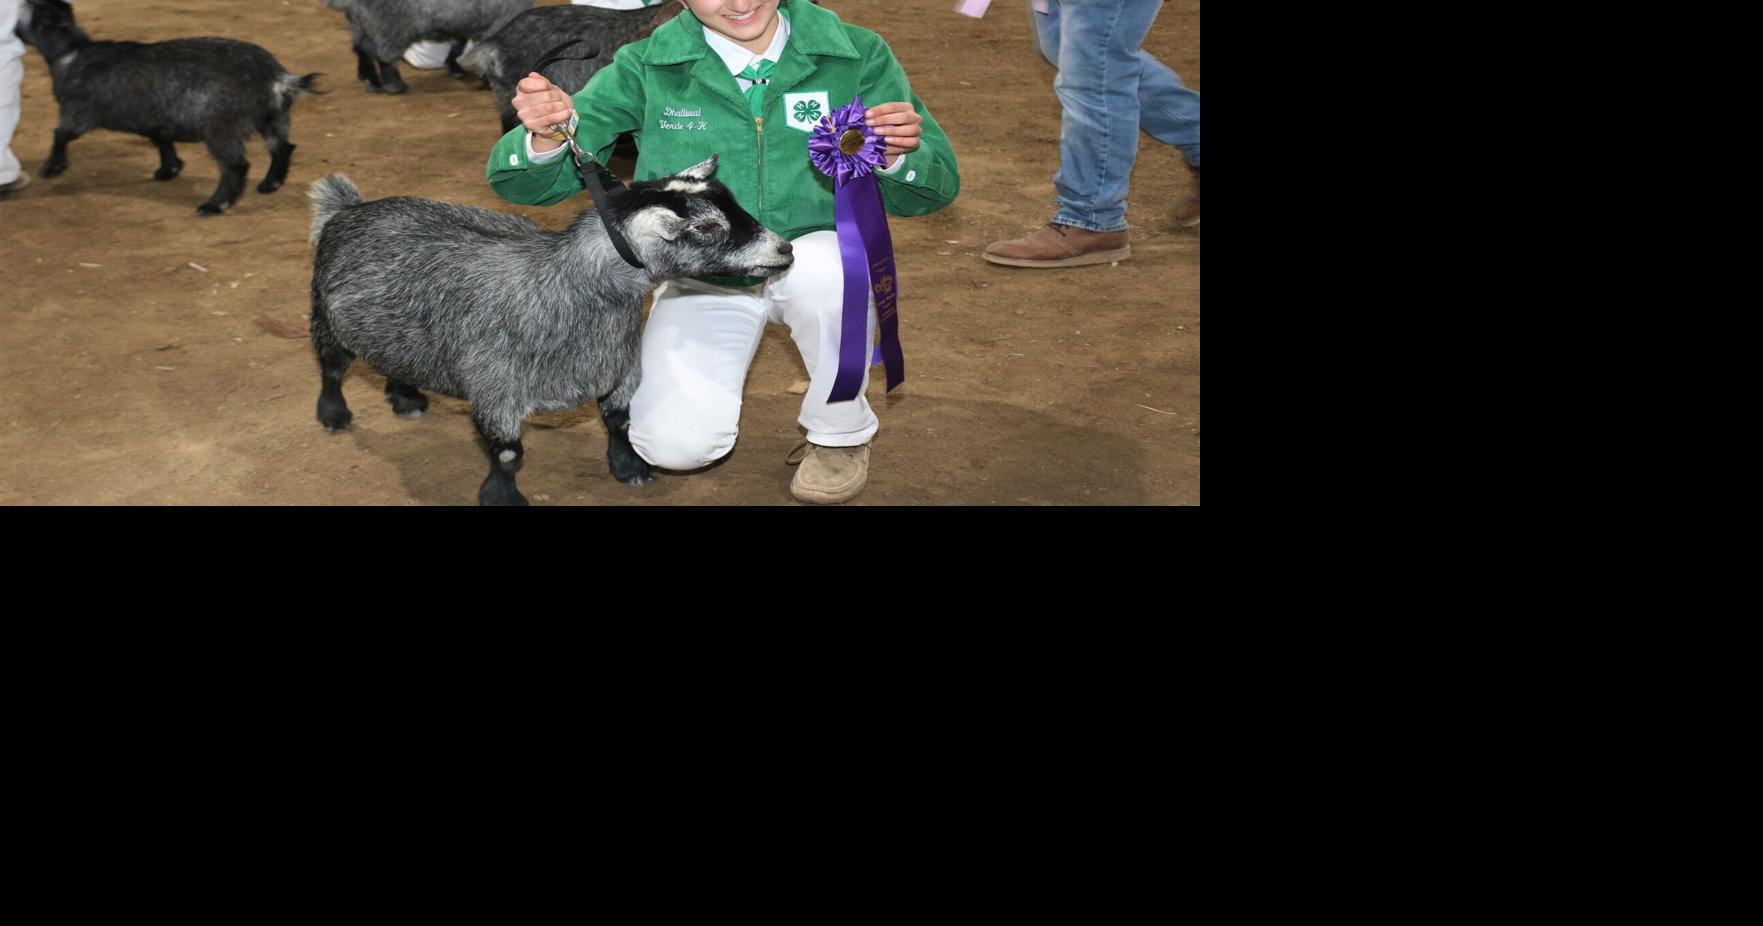 Pygmy goat showmanship brings awards, accomplishment, and pleasure | Agriculture